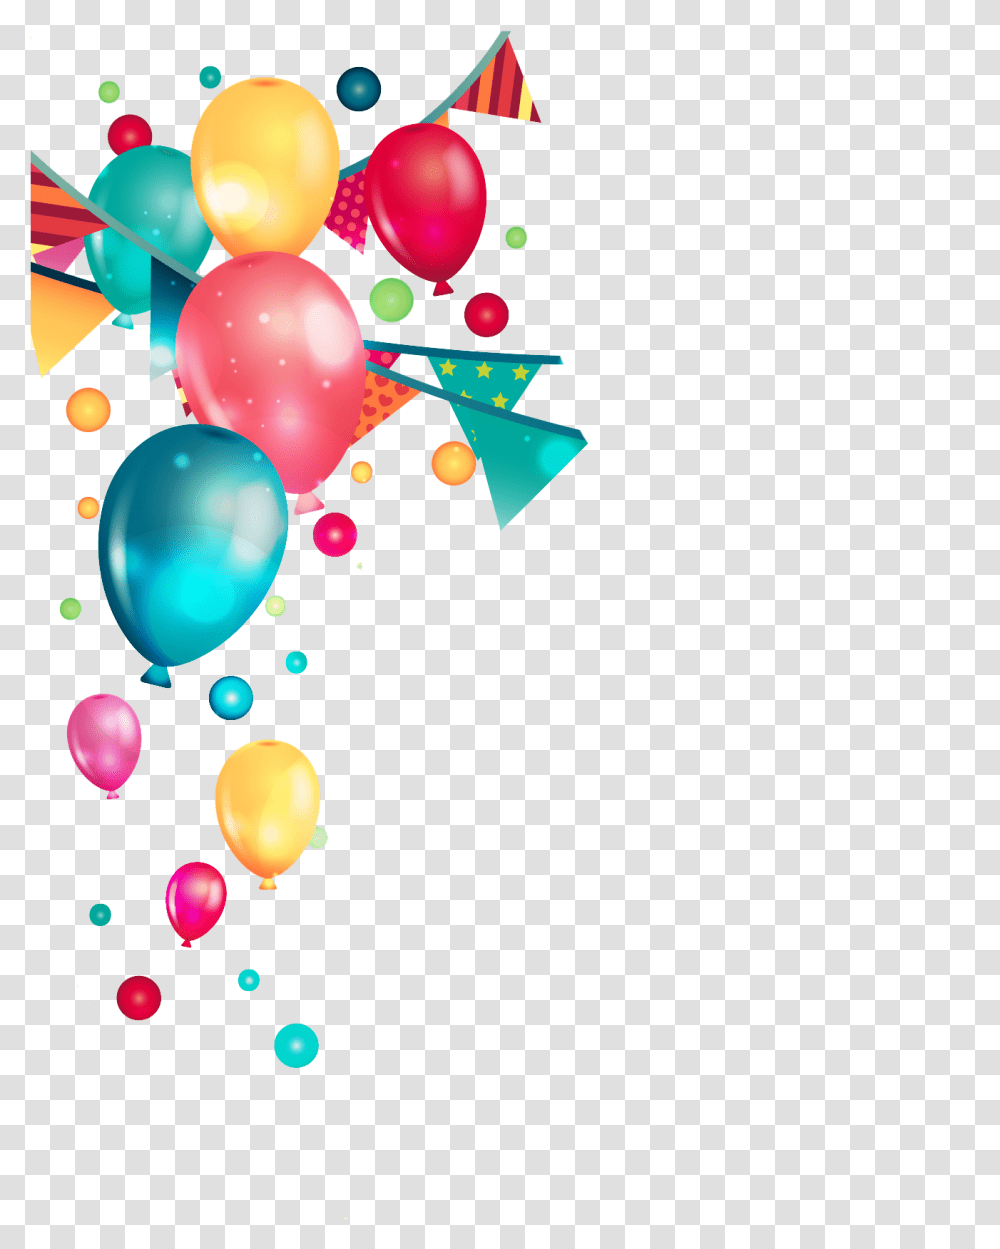 Happy New Year 2020 Latest Manipulation Editing Picsart Background Birthday Balloons, Paper, Confetti Transparent Png